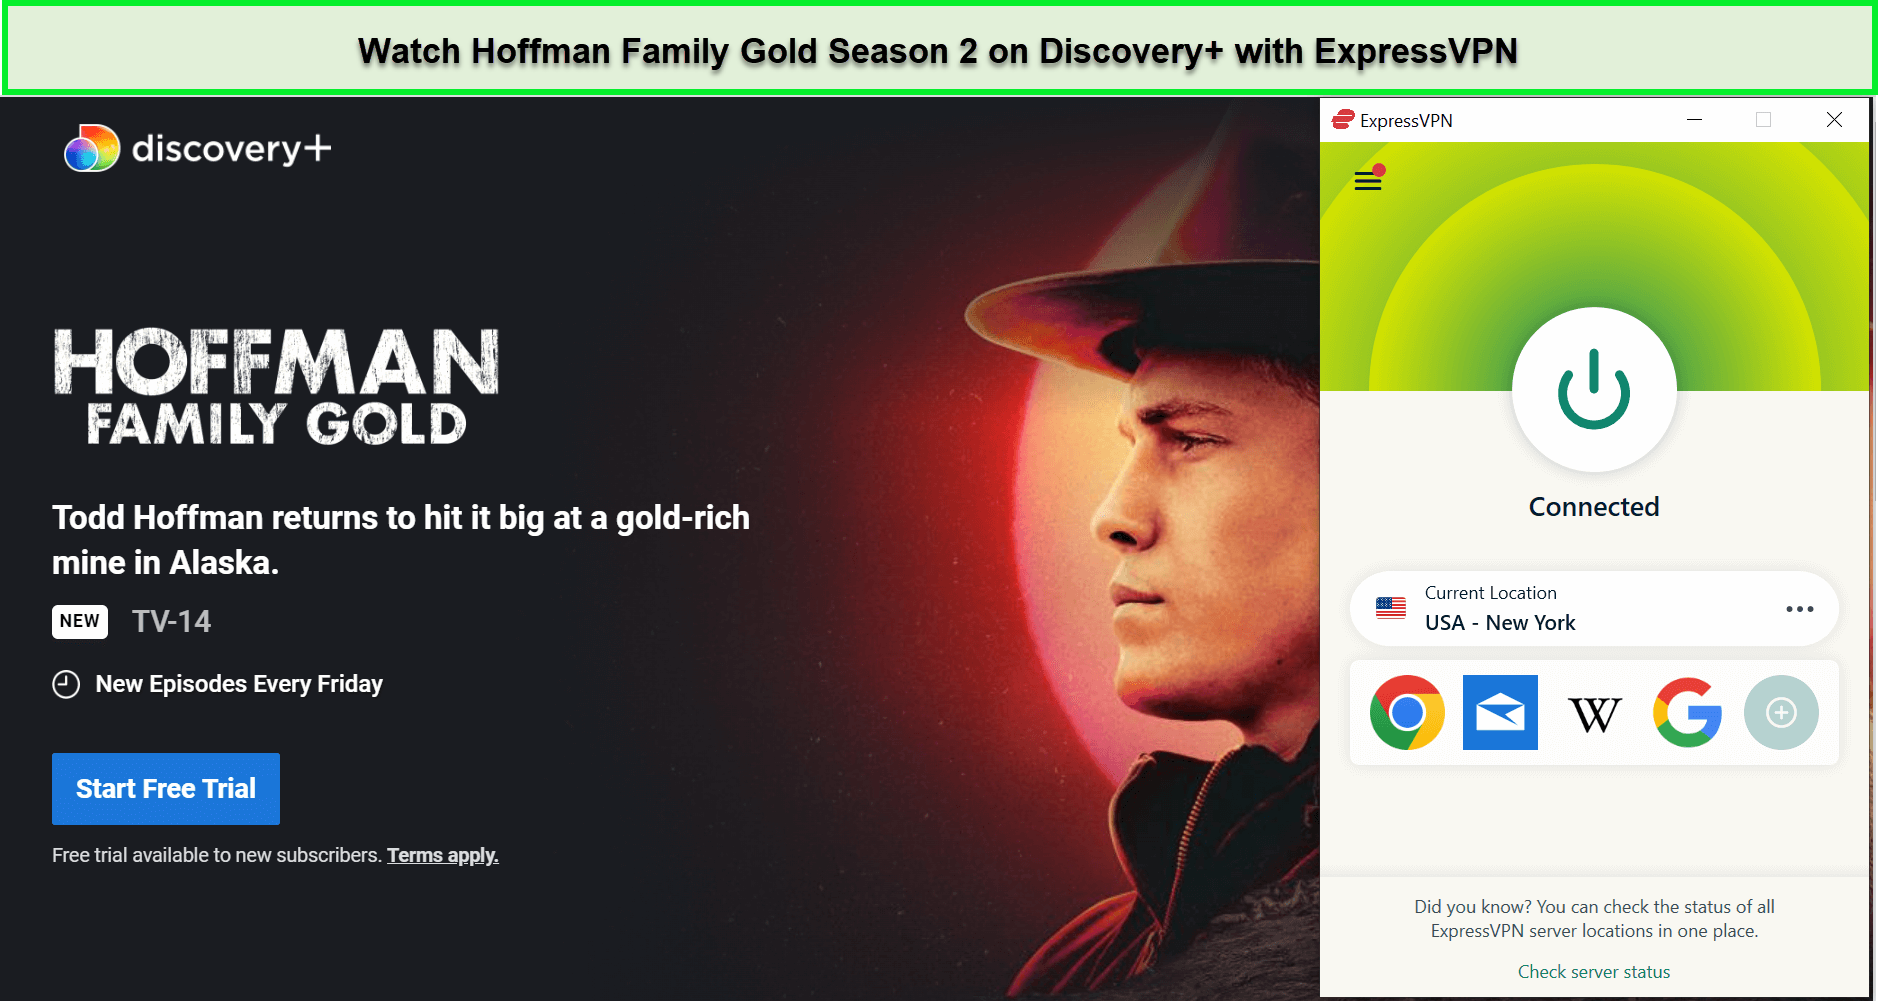 Watch-Hoffman-Family-Gold-Season-2-in-jp-on-Discovery-with-ExpressVPN.